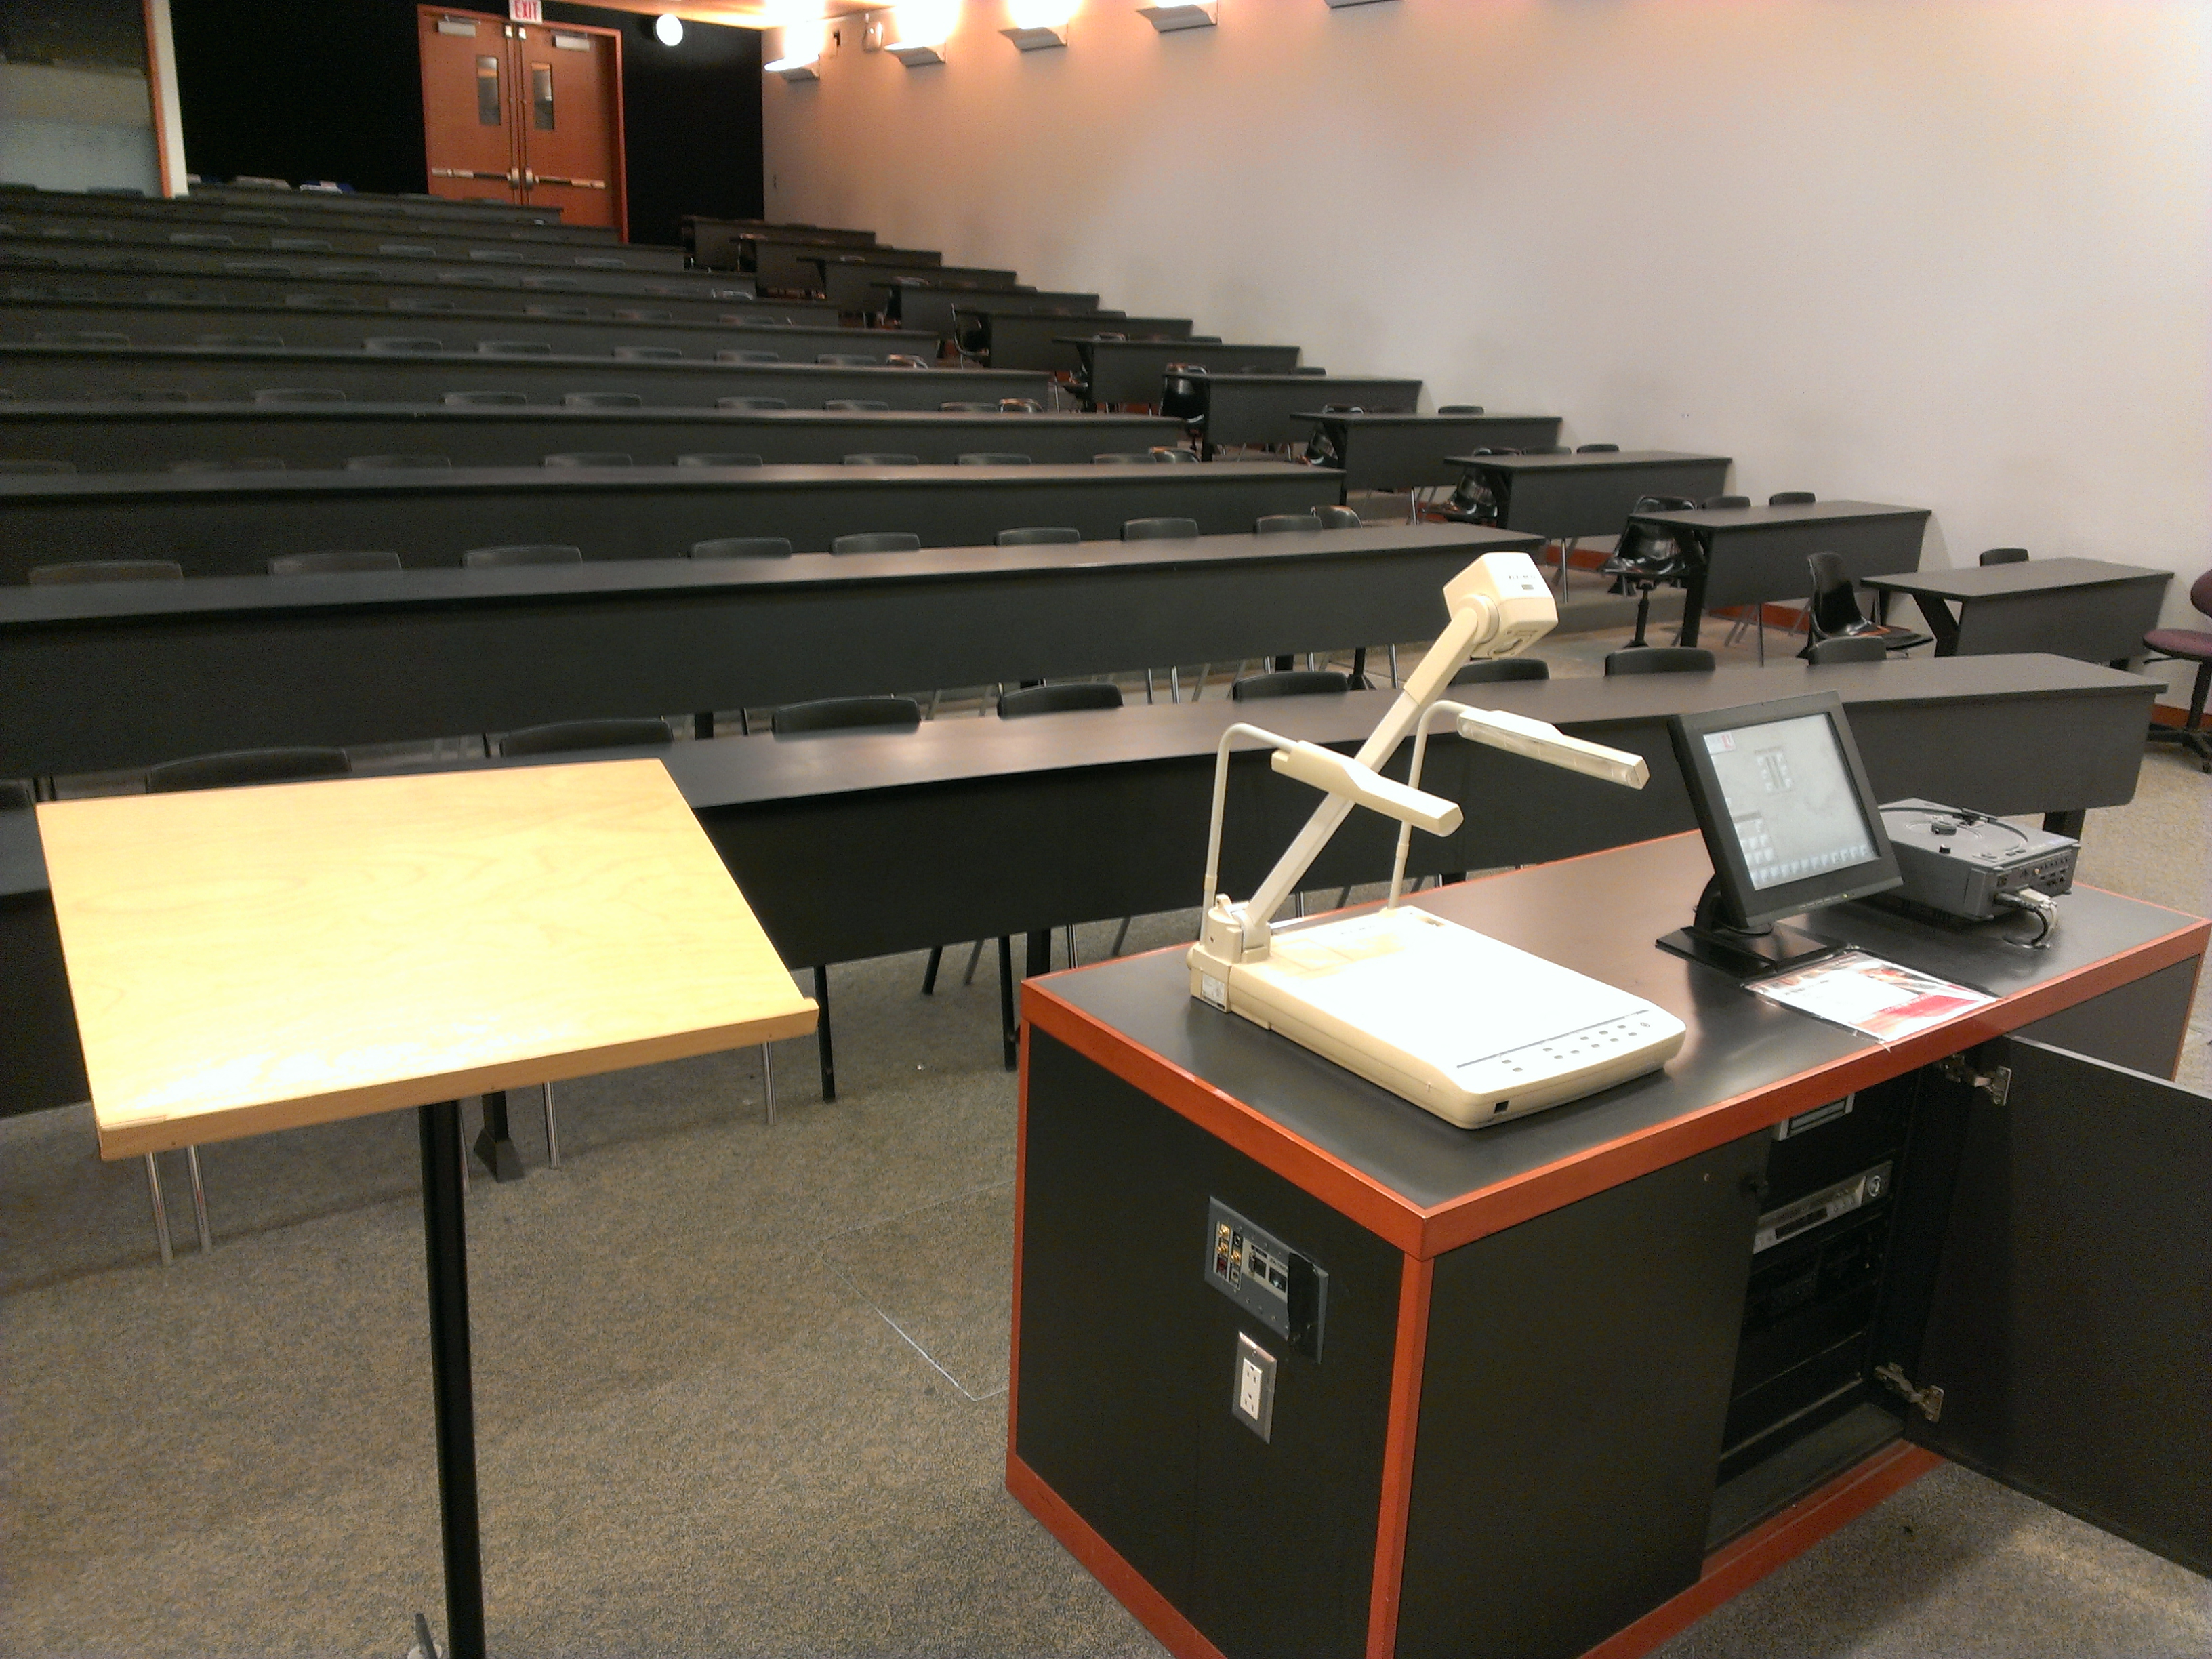 Image of a lecture hall